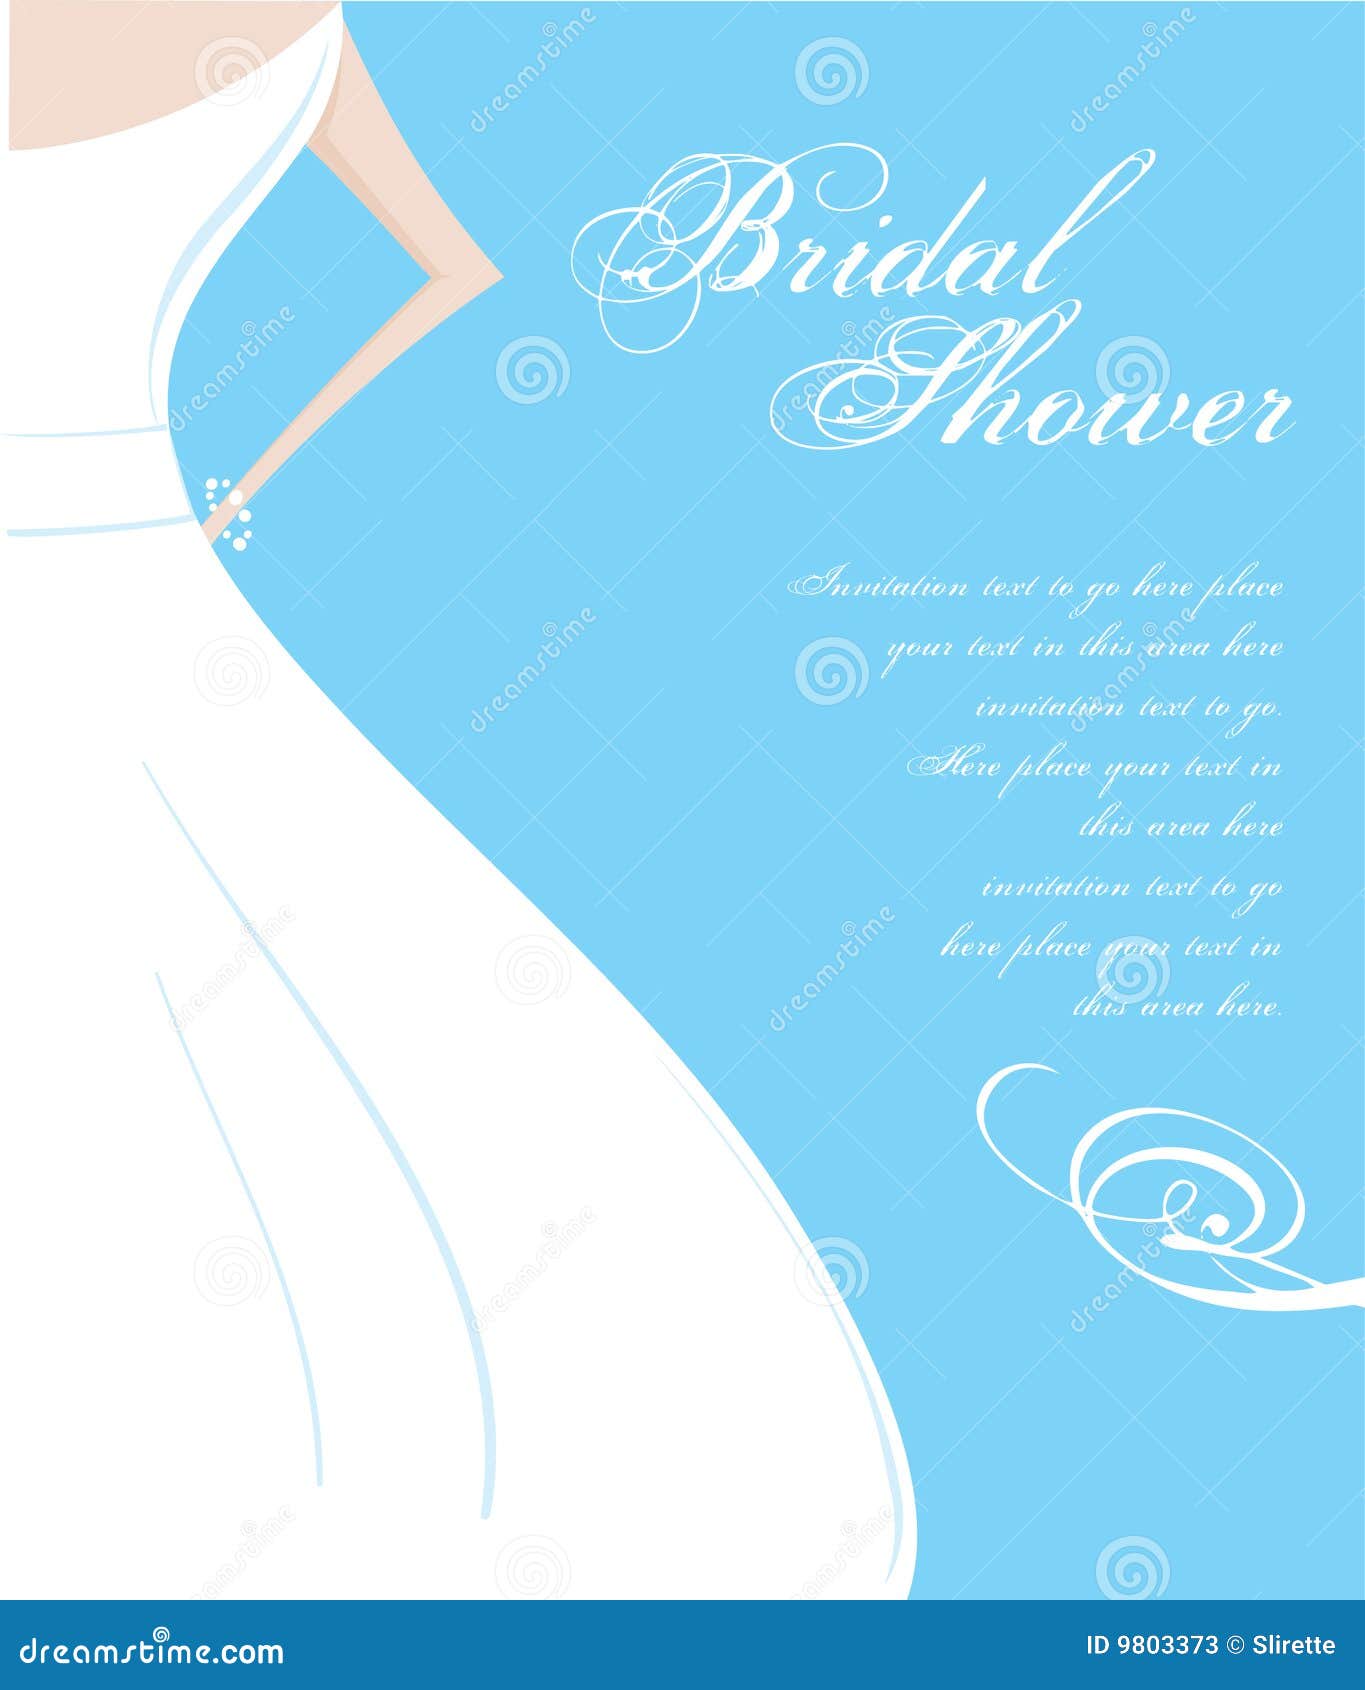 free clipart for wedding shower invitations - photo #28